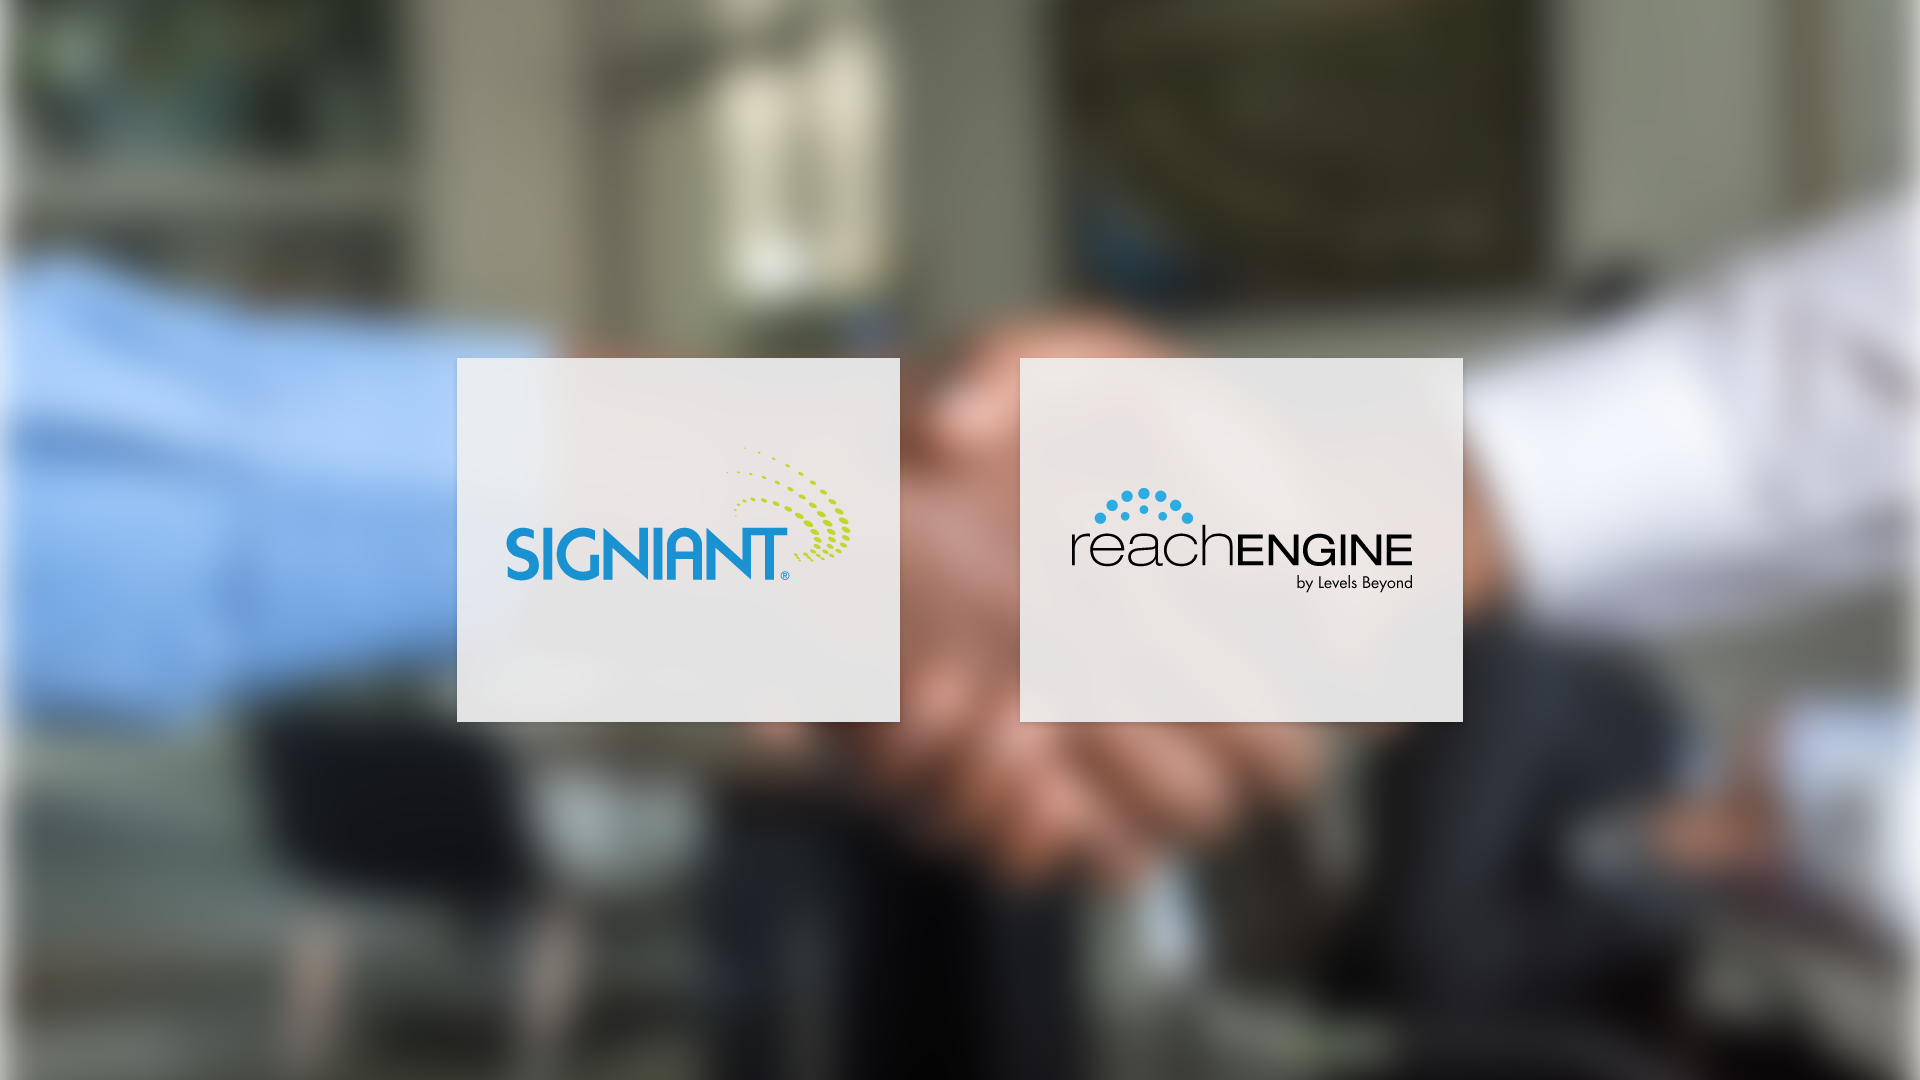 The Signiant logo next to the Reach Engine logo.